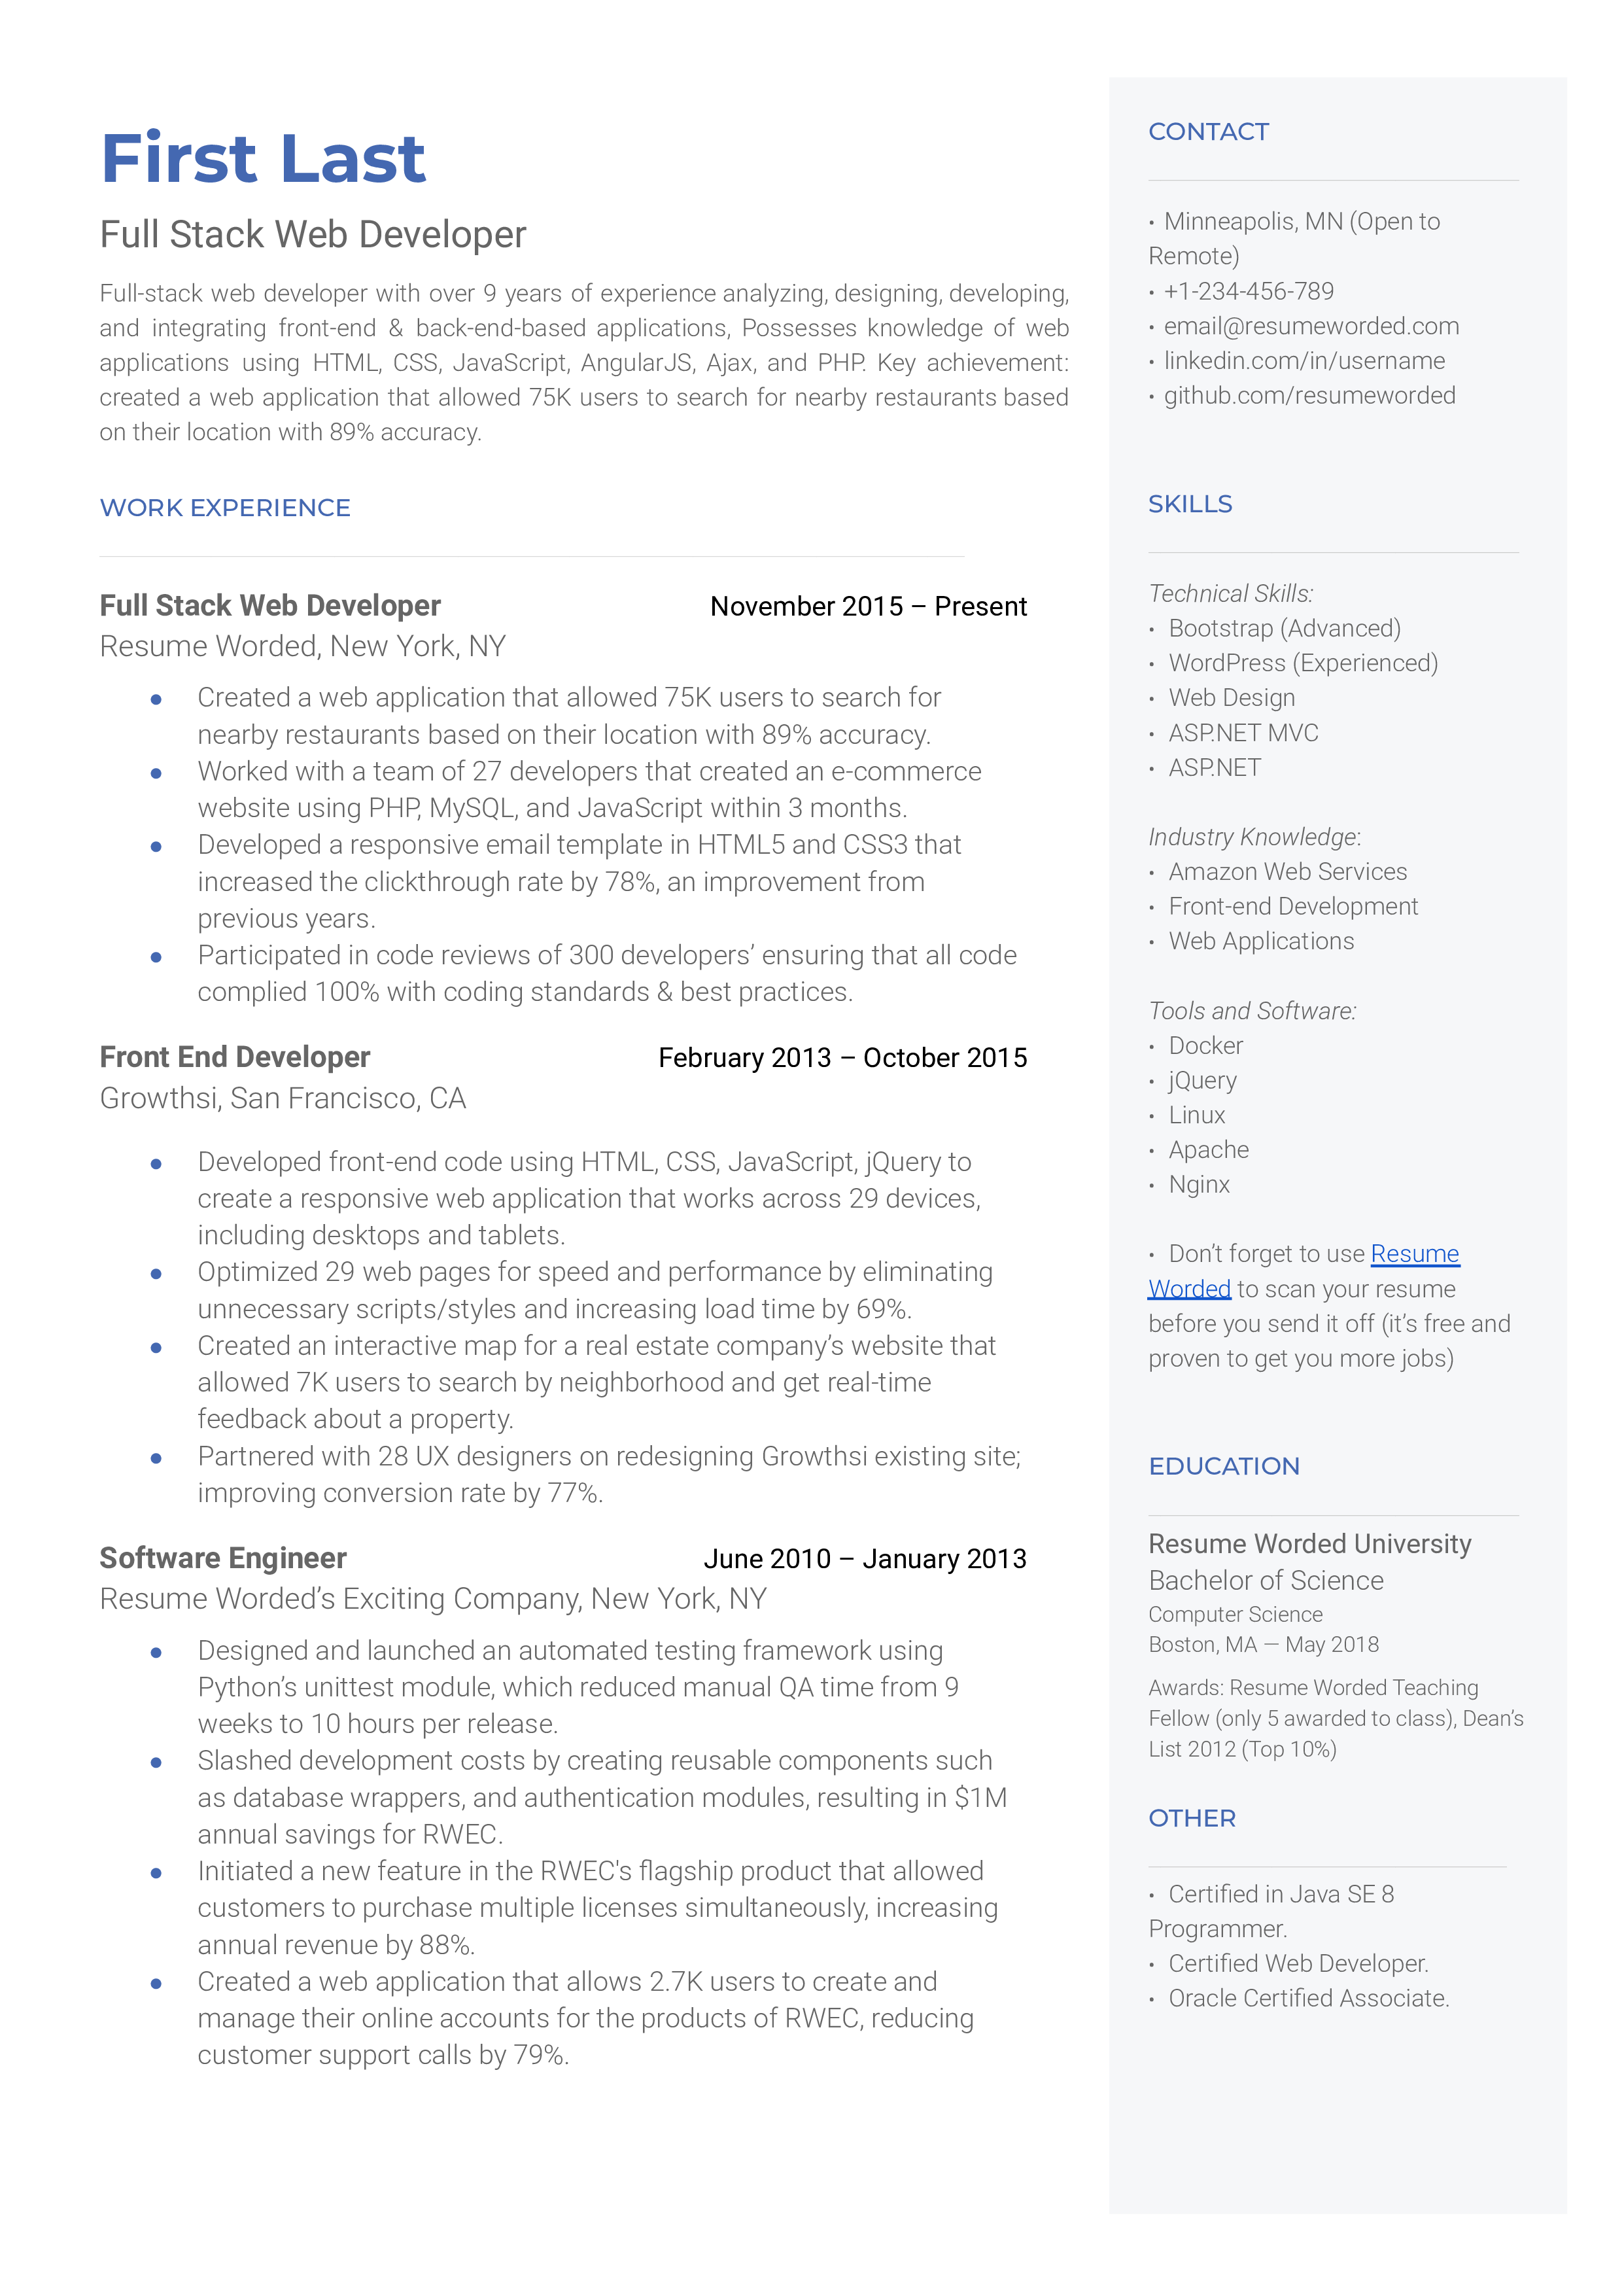 A full-stack web developer resume sample that highlights the applicant’s front-end and back-end qualifications.